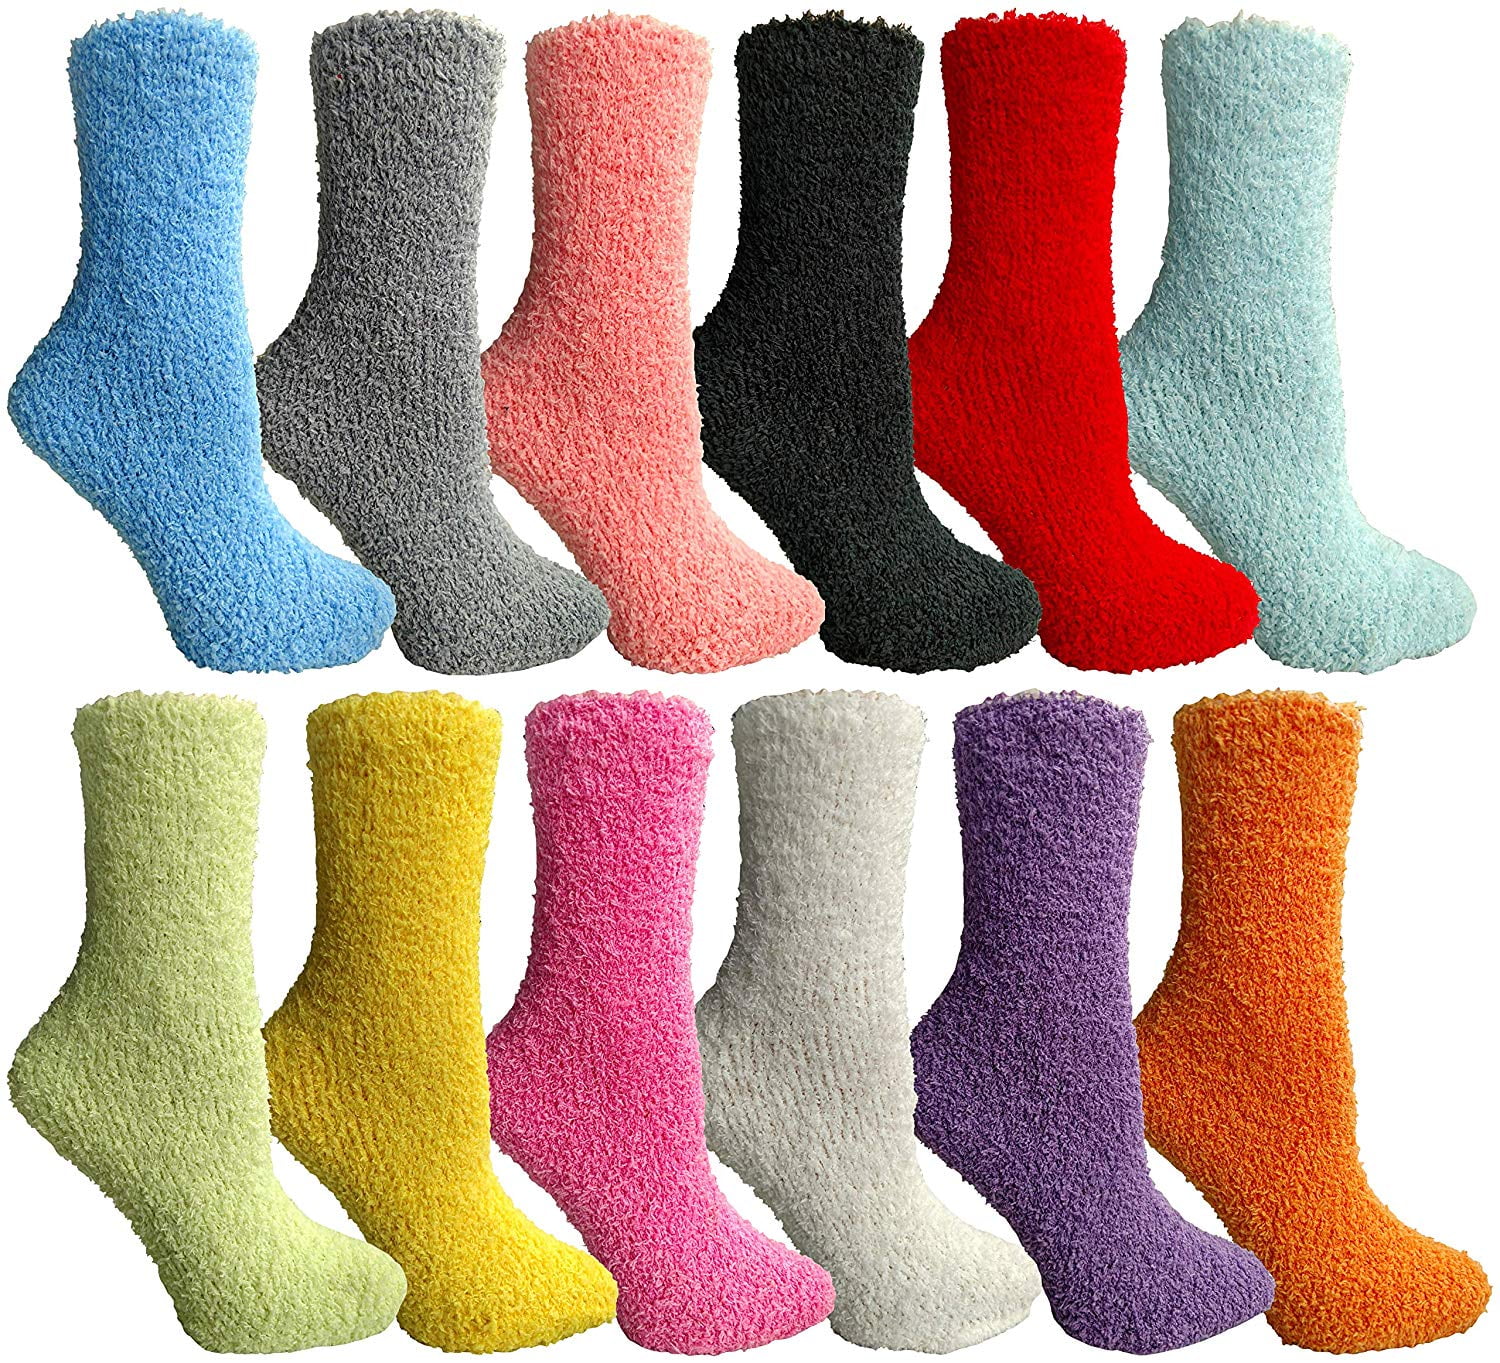 Details about   3 pair pack bed socks warm and cosy brushed for extra softness lightweight 